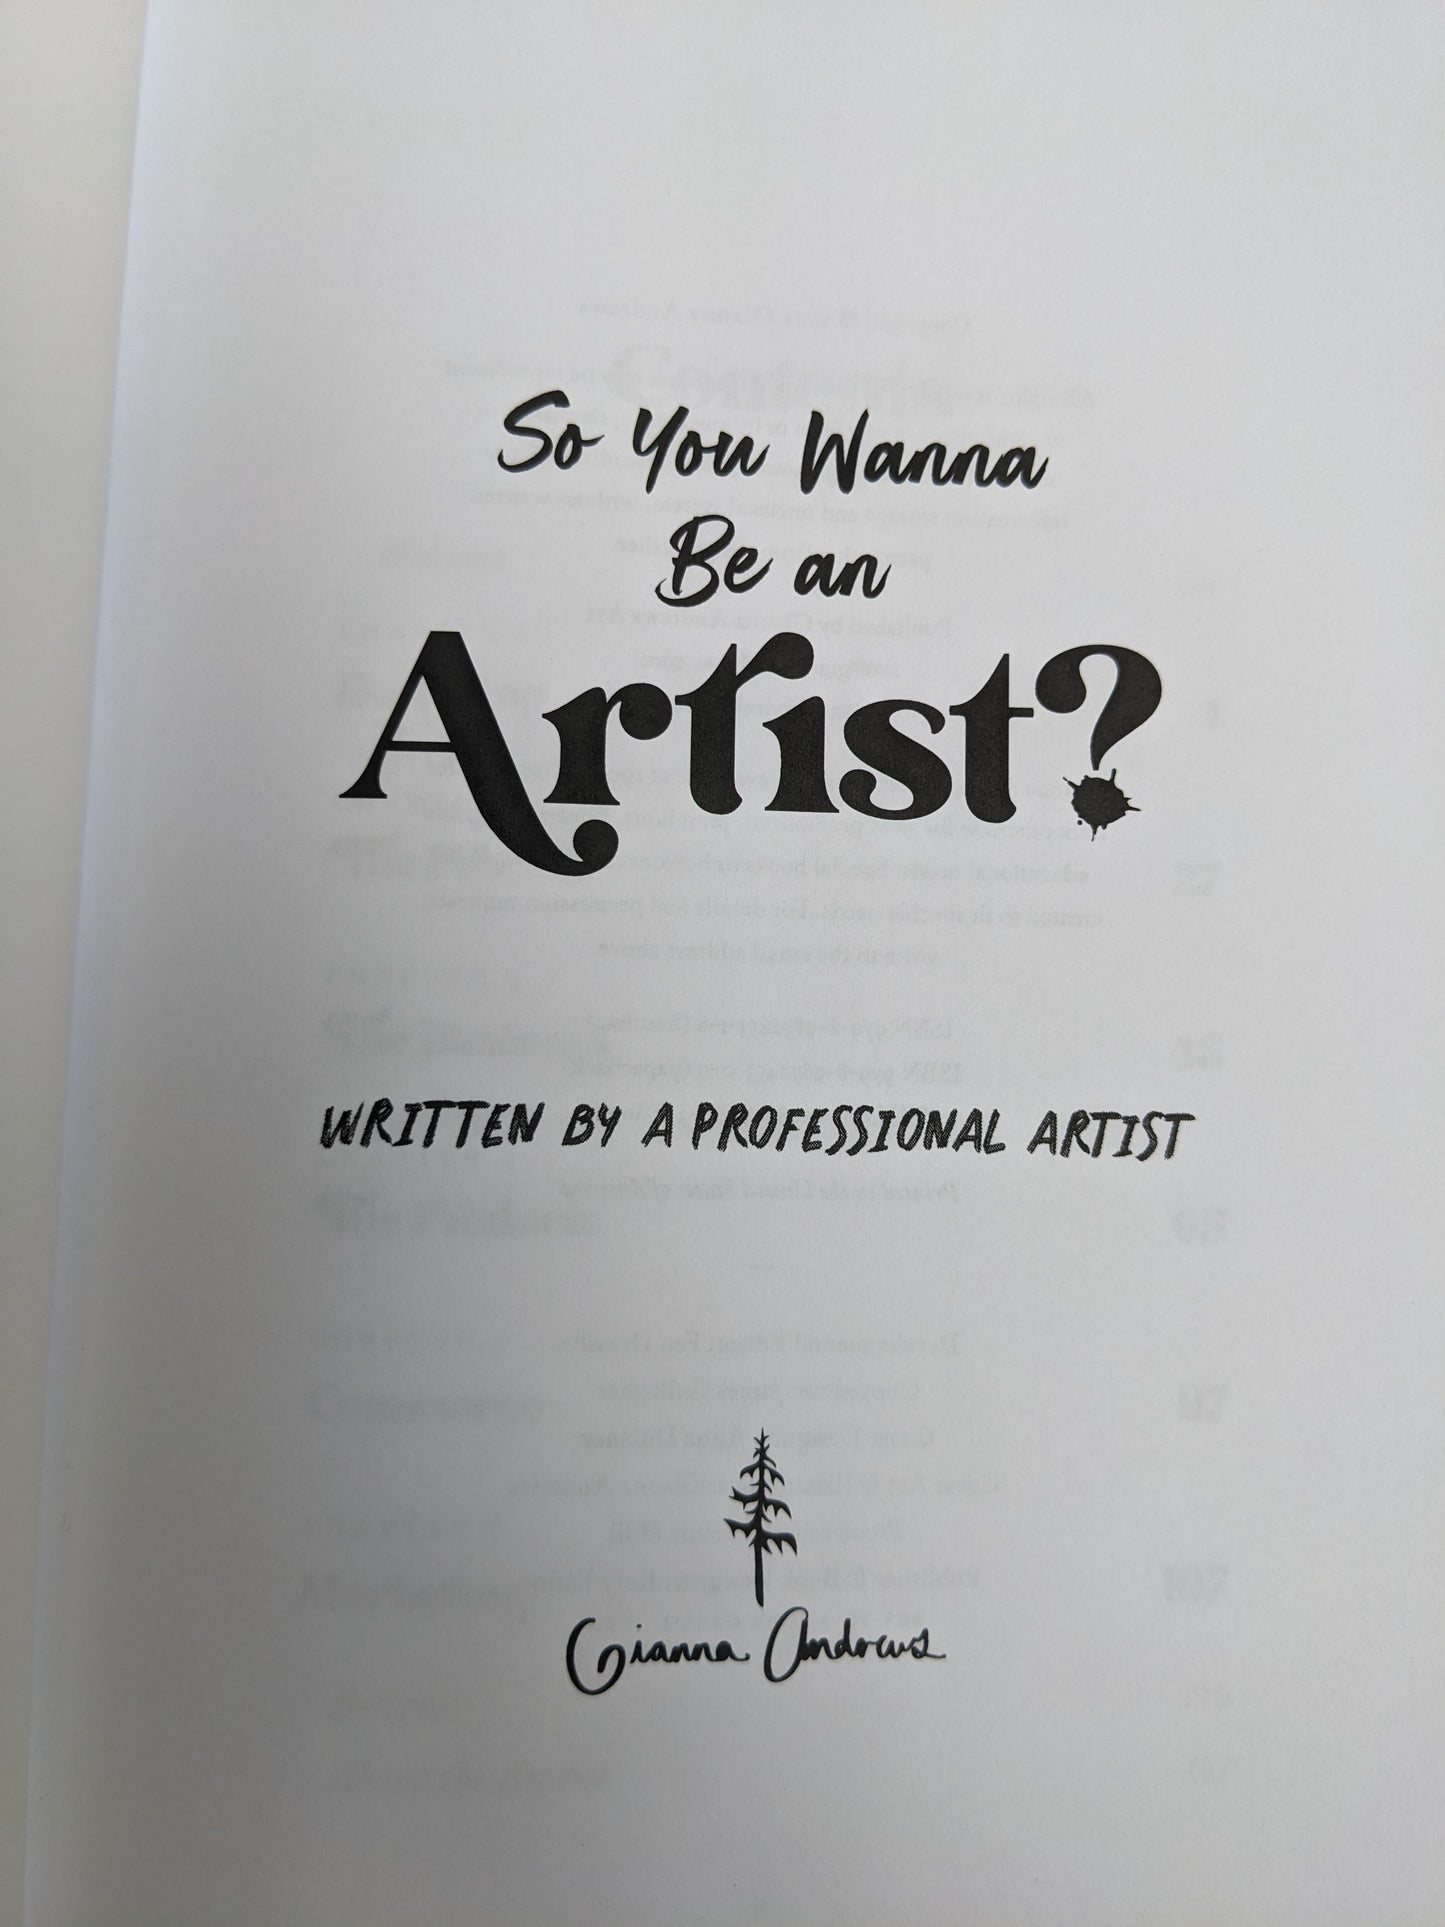 Title Page of Gianna Andrews' book "So You Want to Be An Artist"